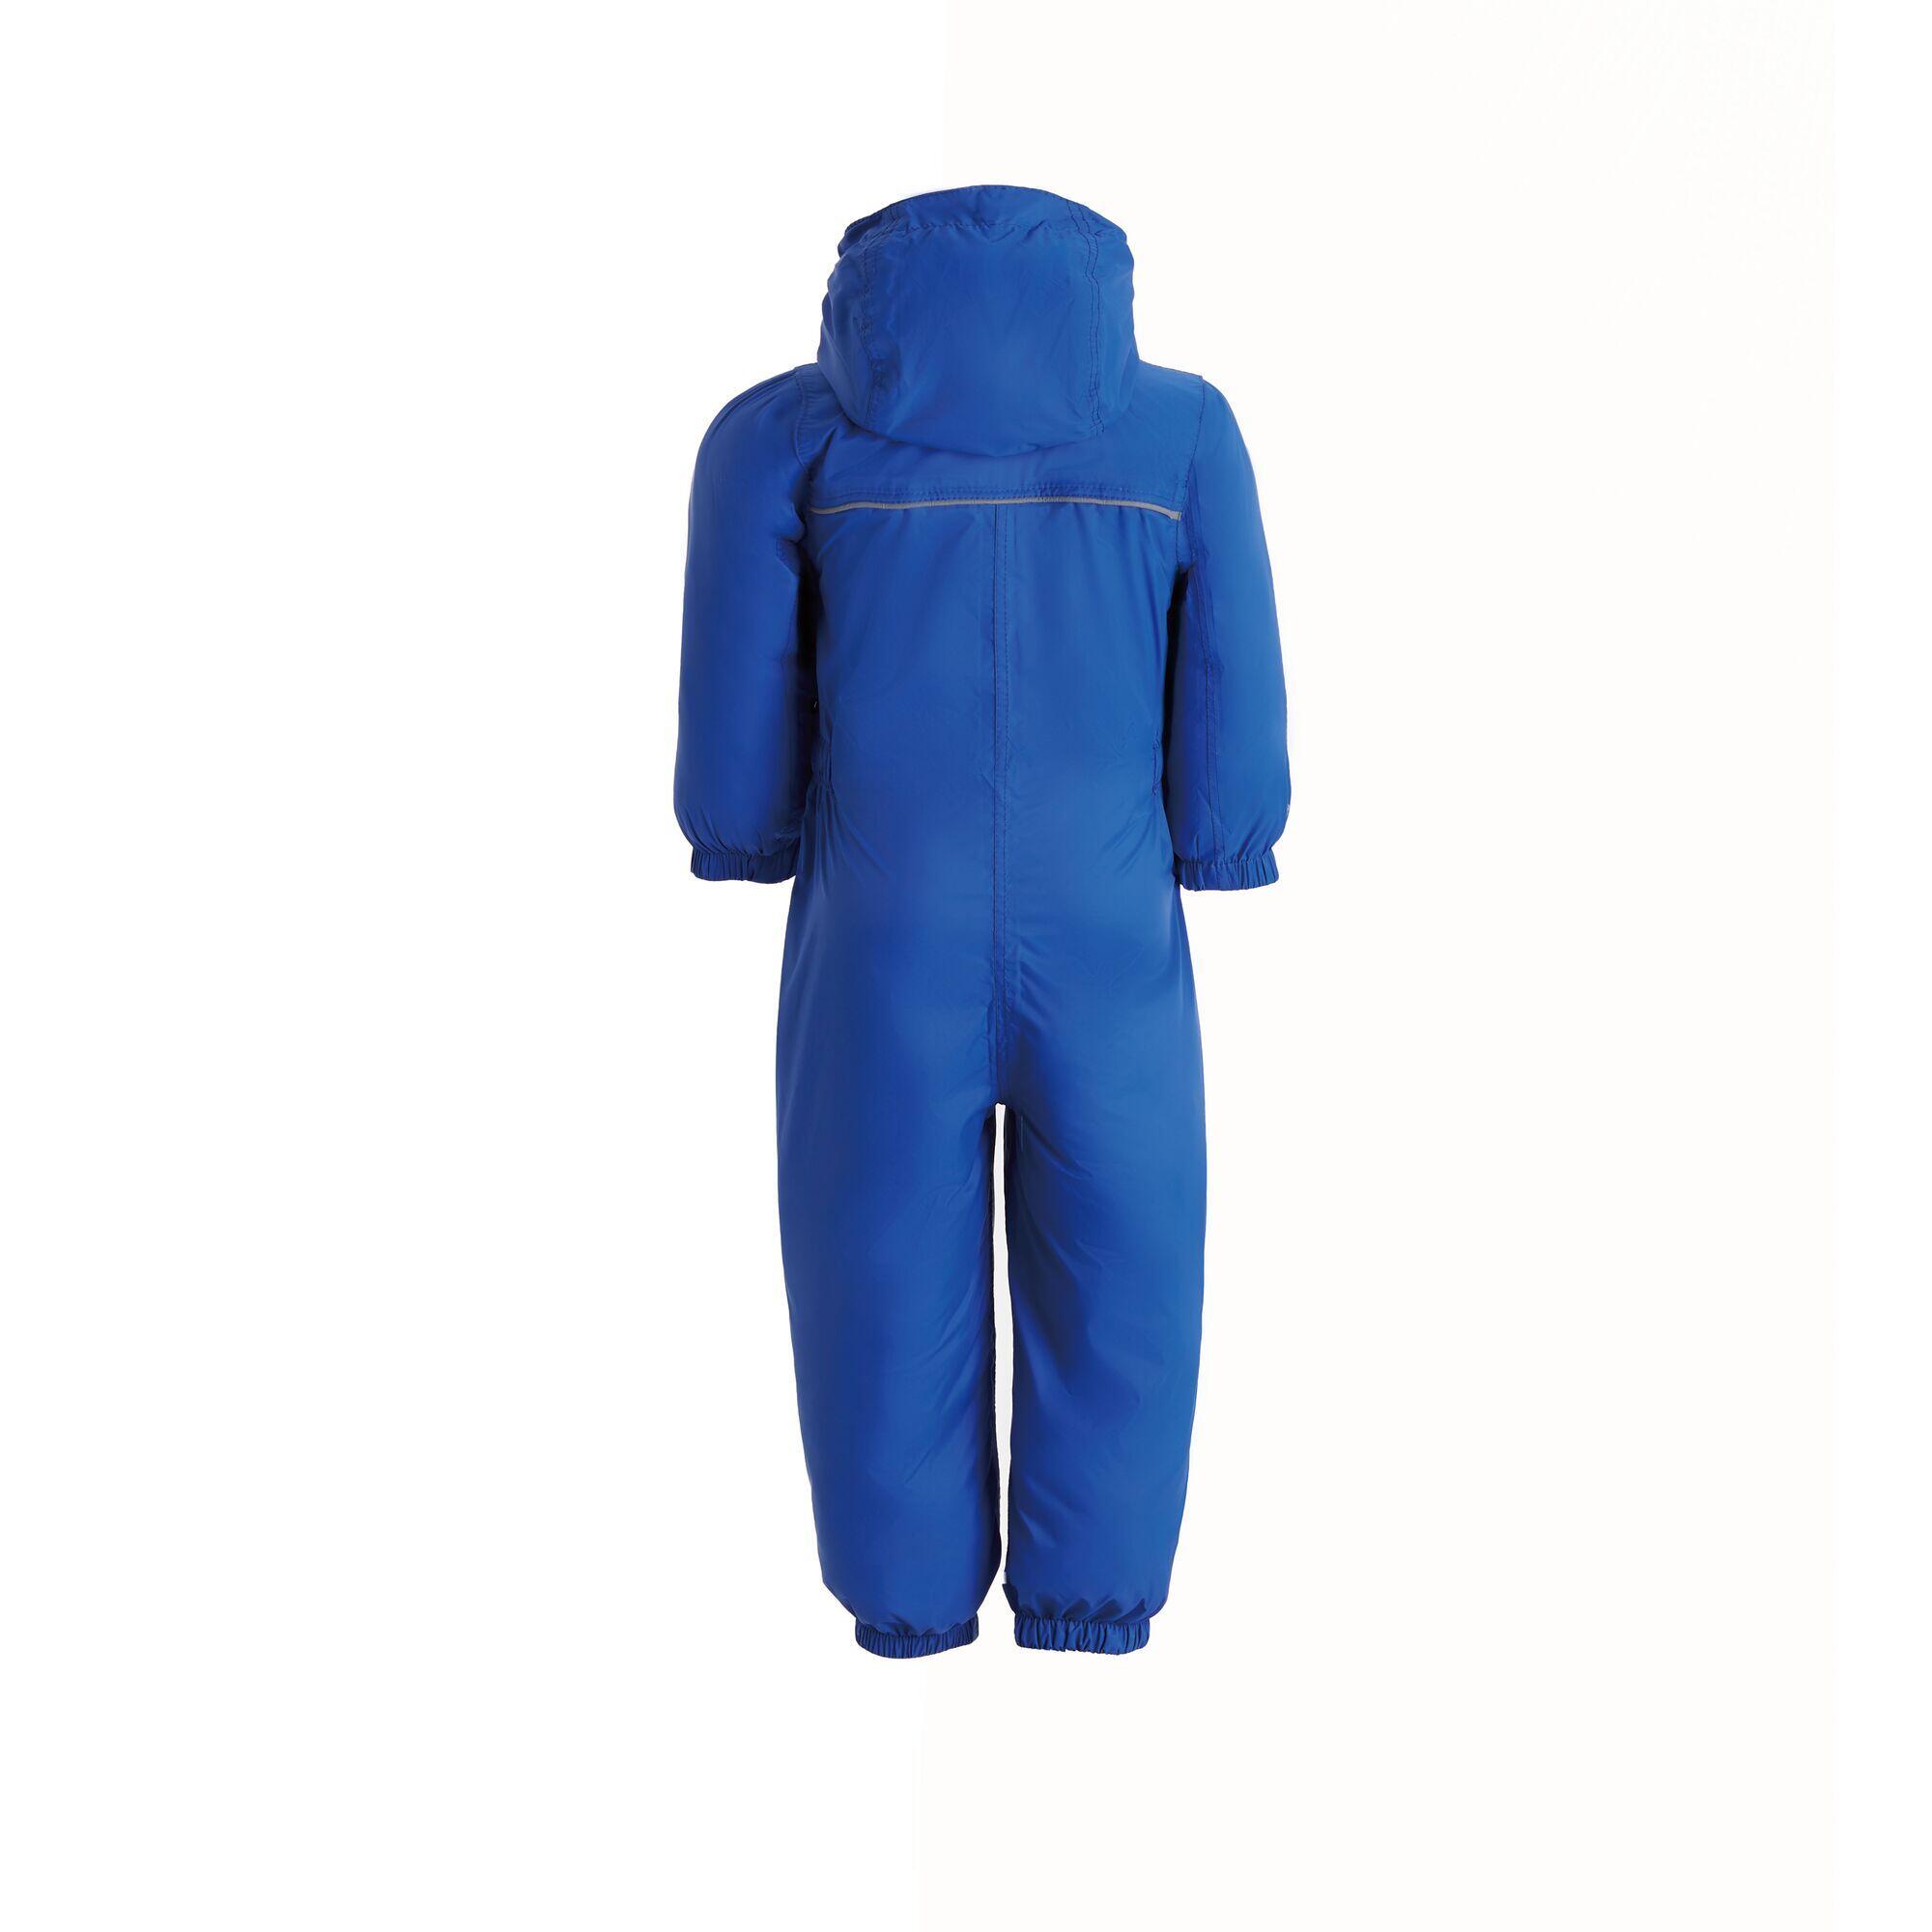 Great Outdoors Childrens Toddlers Puddle IV Waterproof Rainsuit (Oxford Blue) 3/5